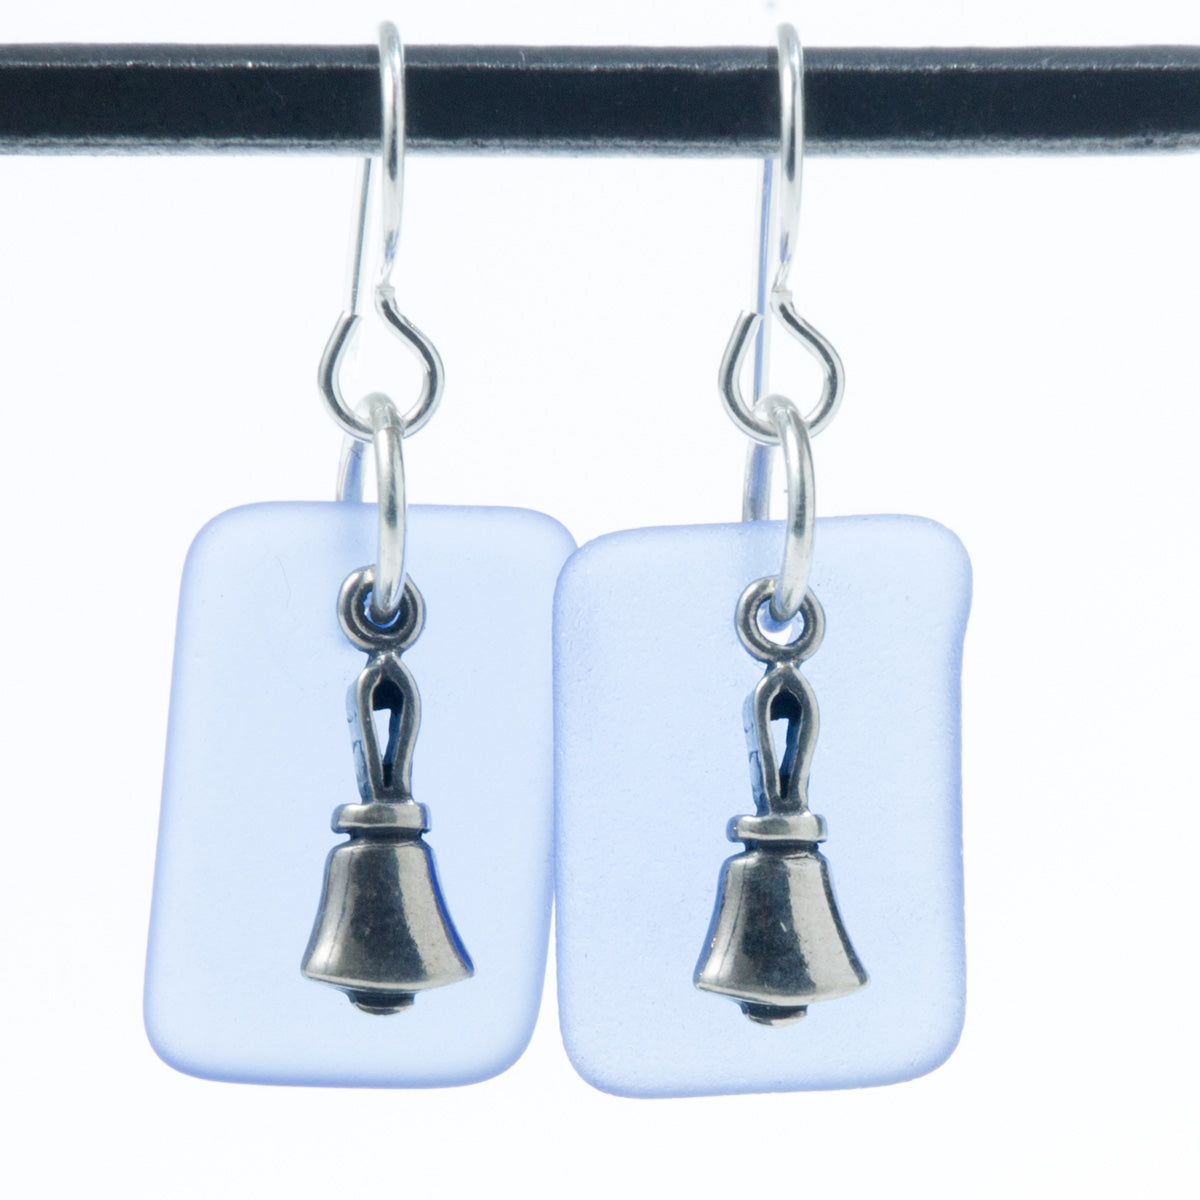 SeaGlass Earrings - glass with sterling silver bell (SEA)